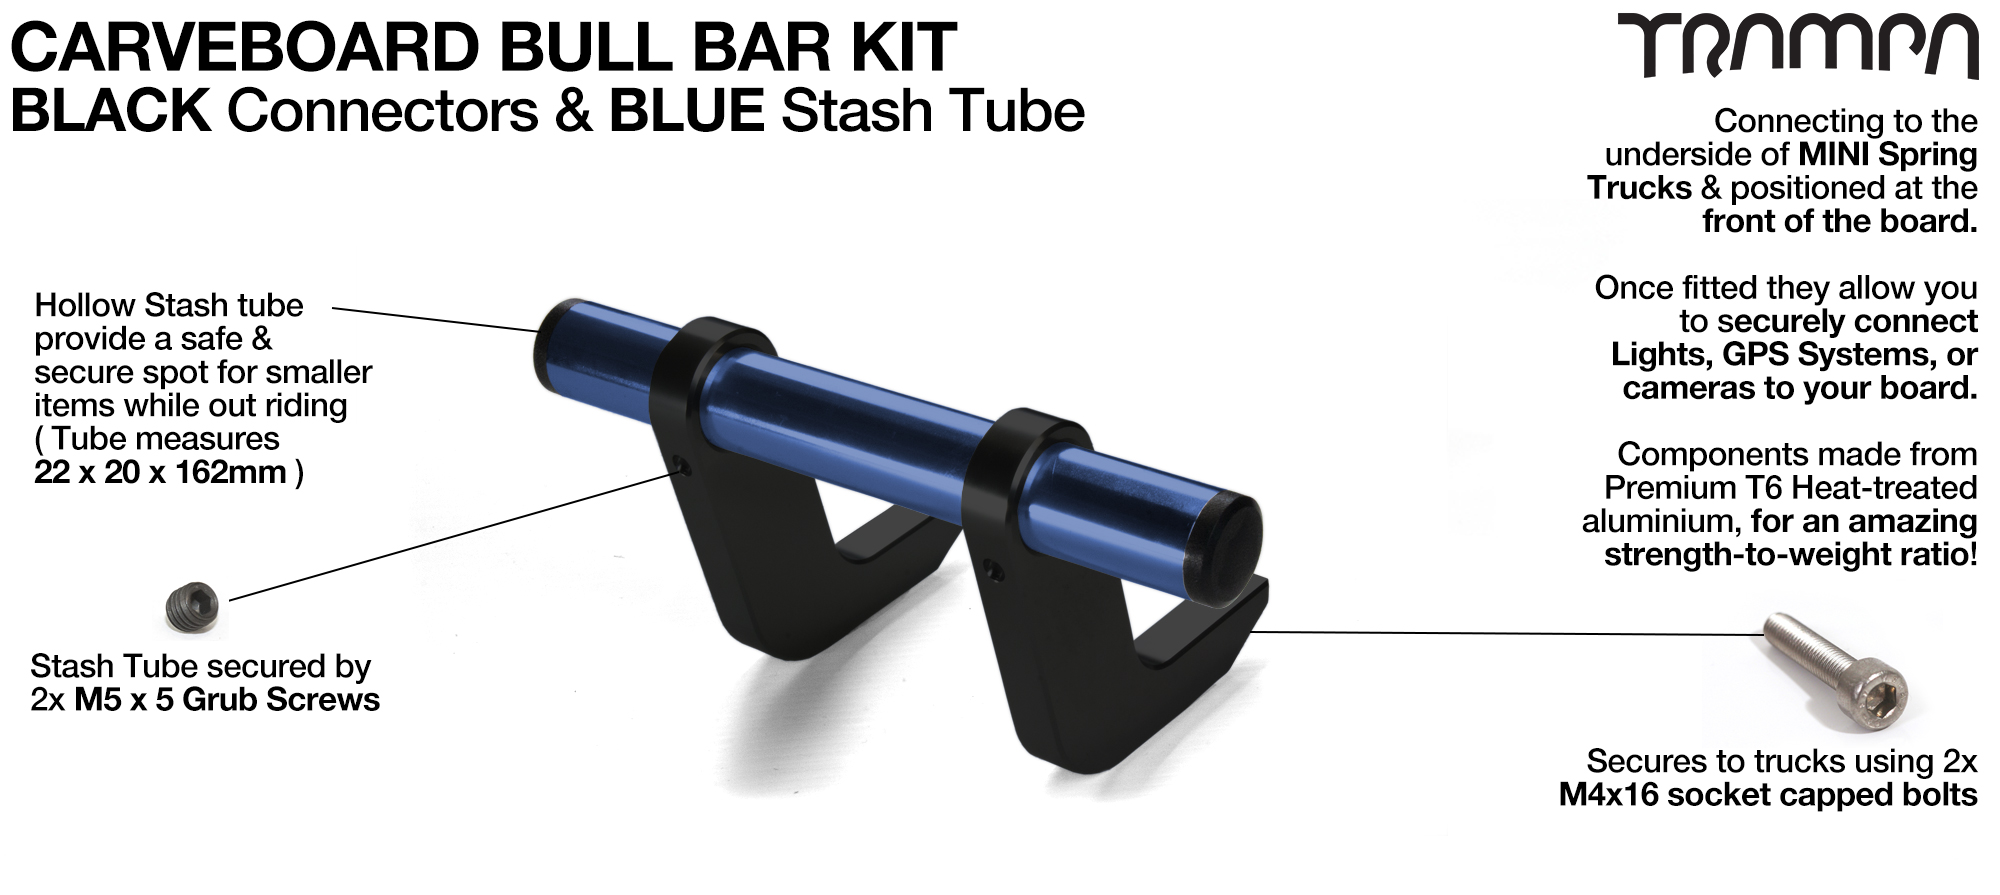 BLACK Uprights & BLUE Crossbar BULL BARS for CARVE BOARDS using T6 Heat Treated CNC'd Aluminum Clamps, Hollow Aluminium Stash Tubes with Rubber end bungs